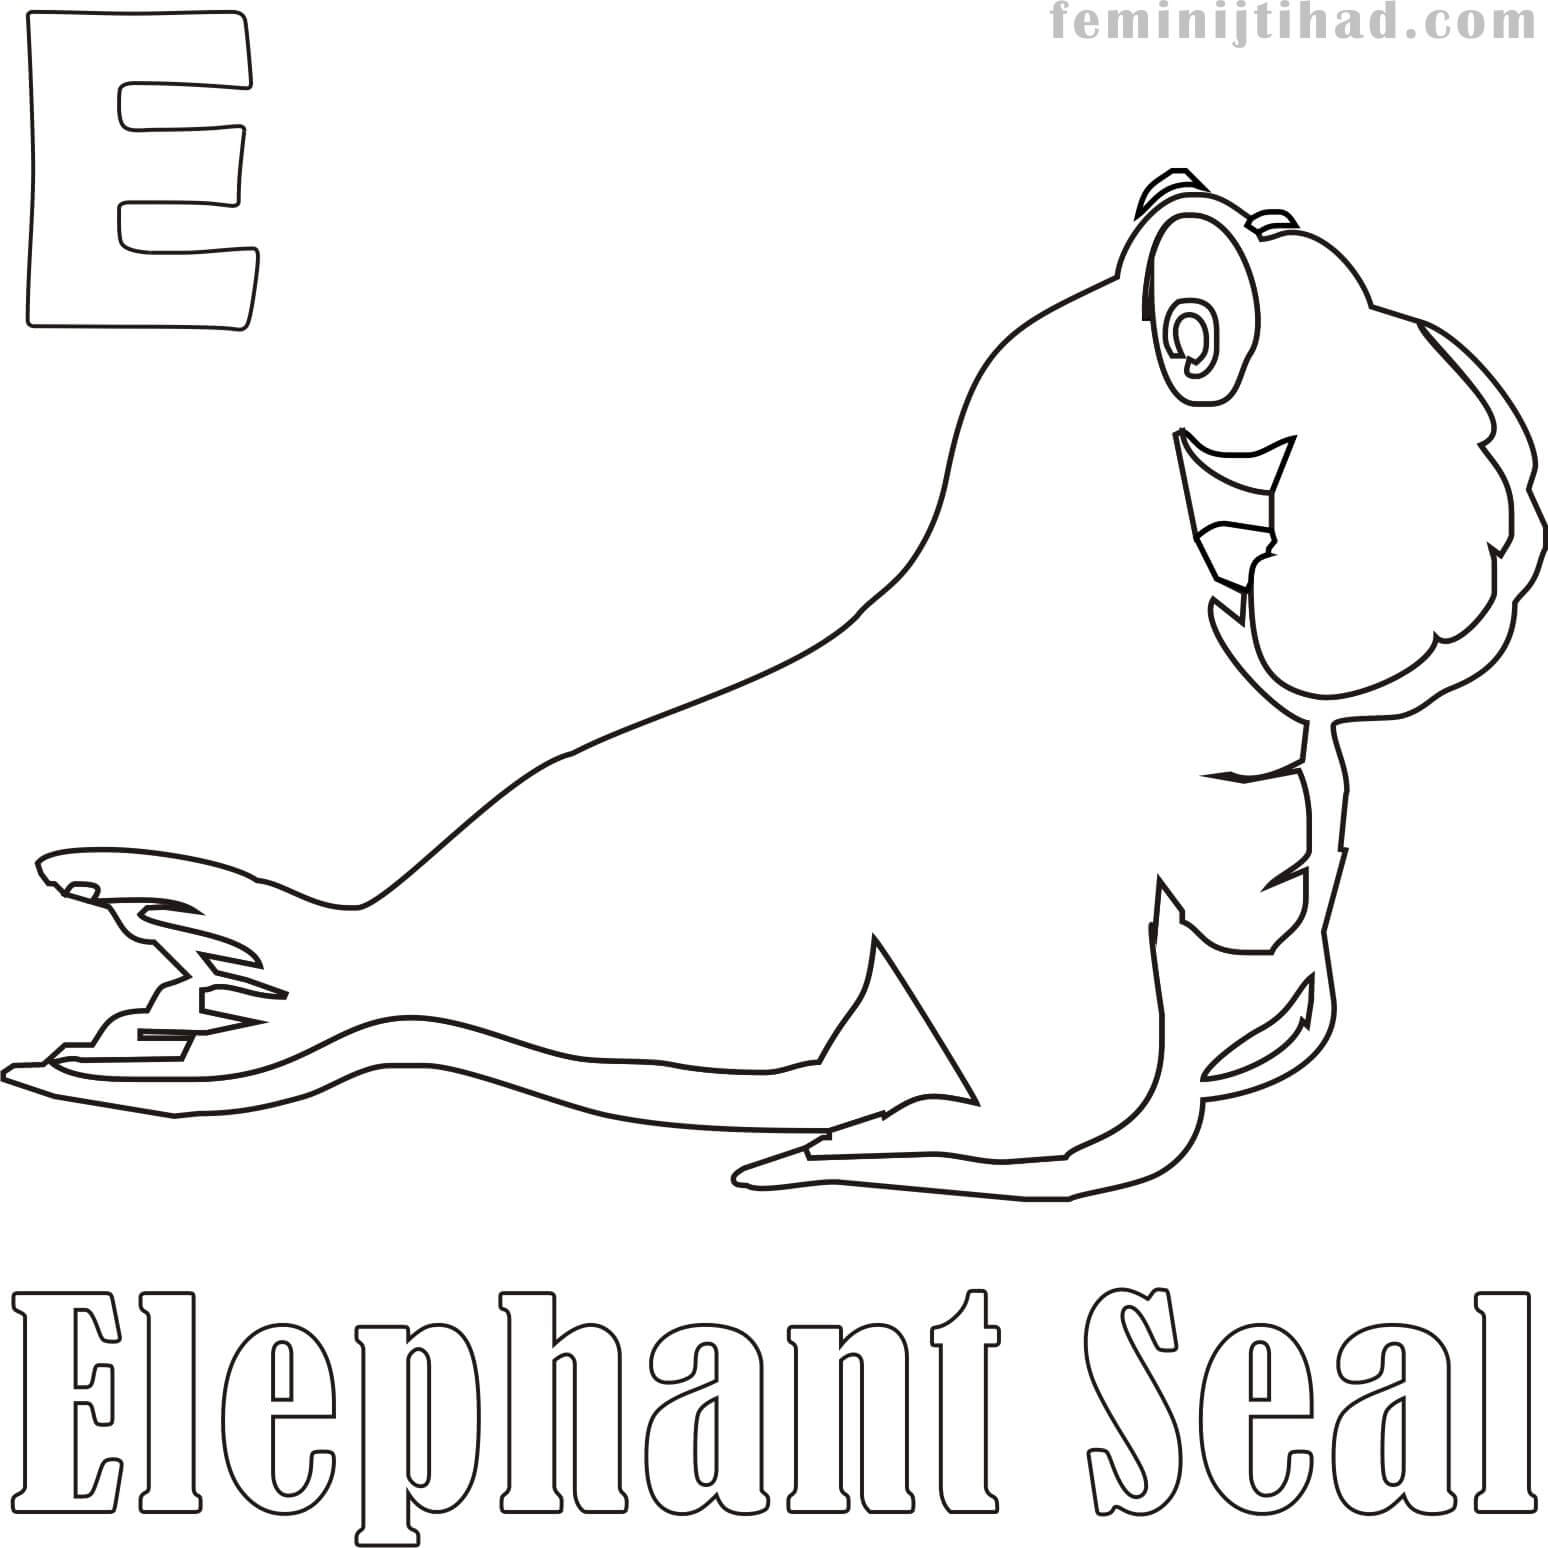 Elephant Seal Coloring Page Printable